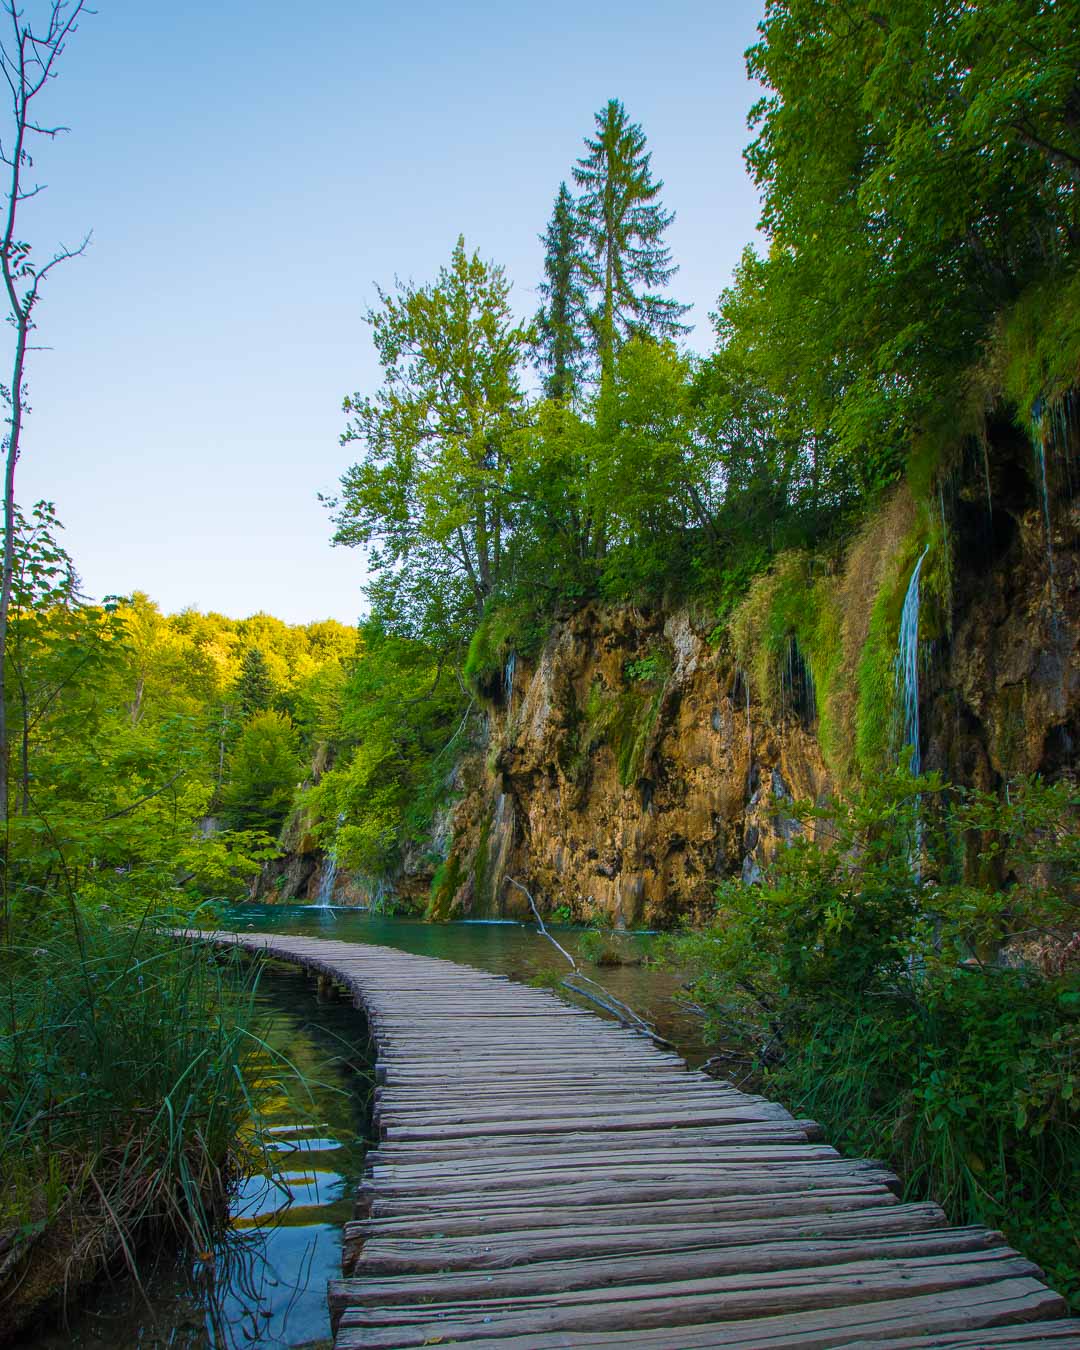 another stroll on wooden path in plitvice